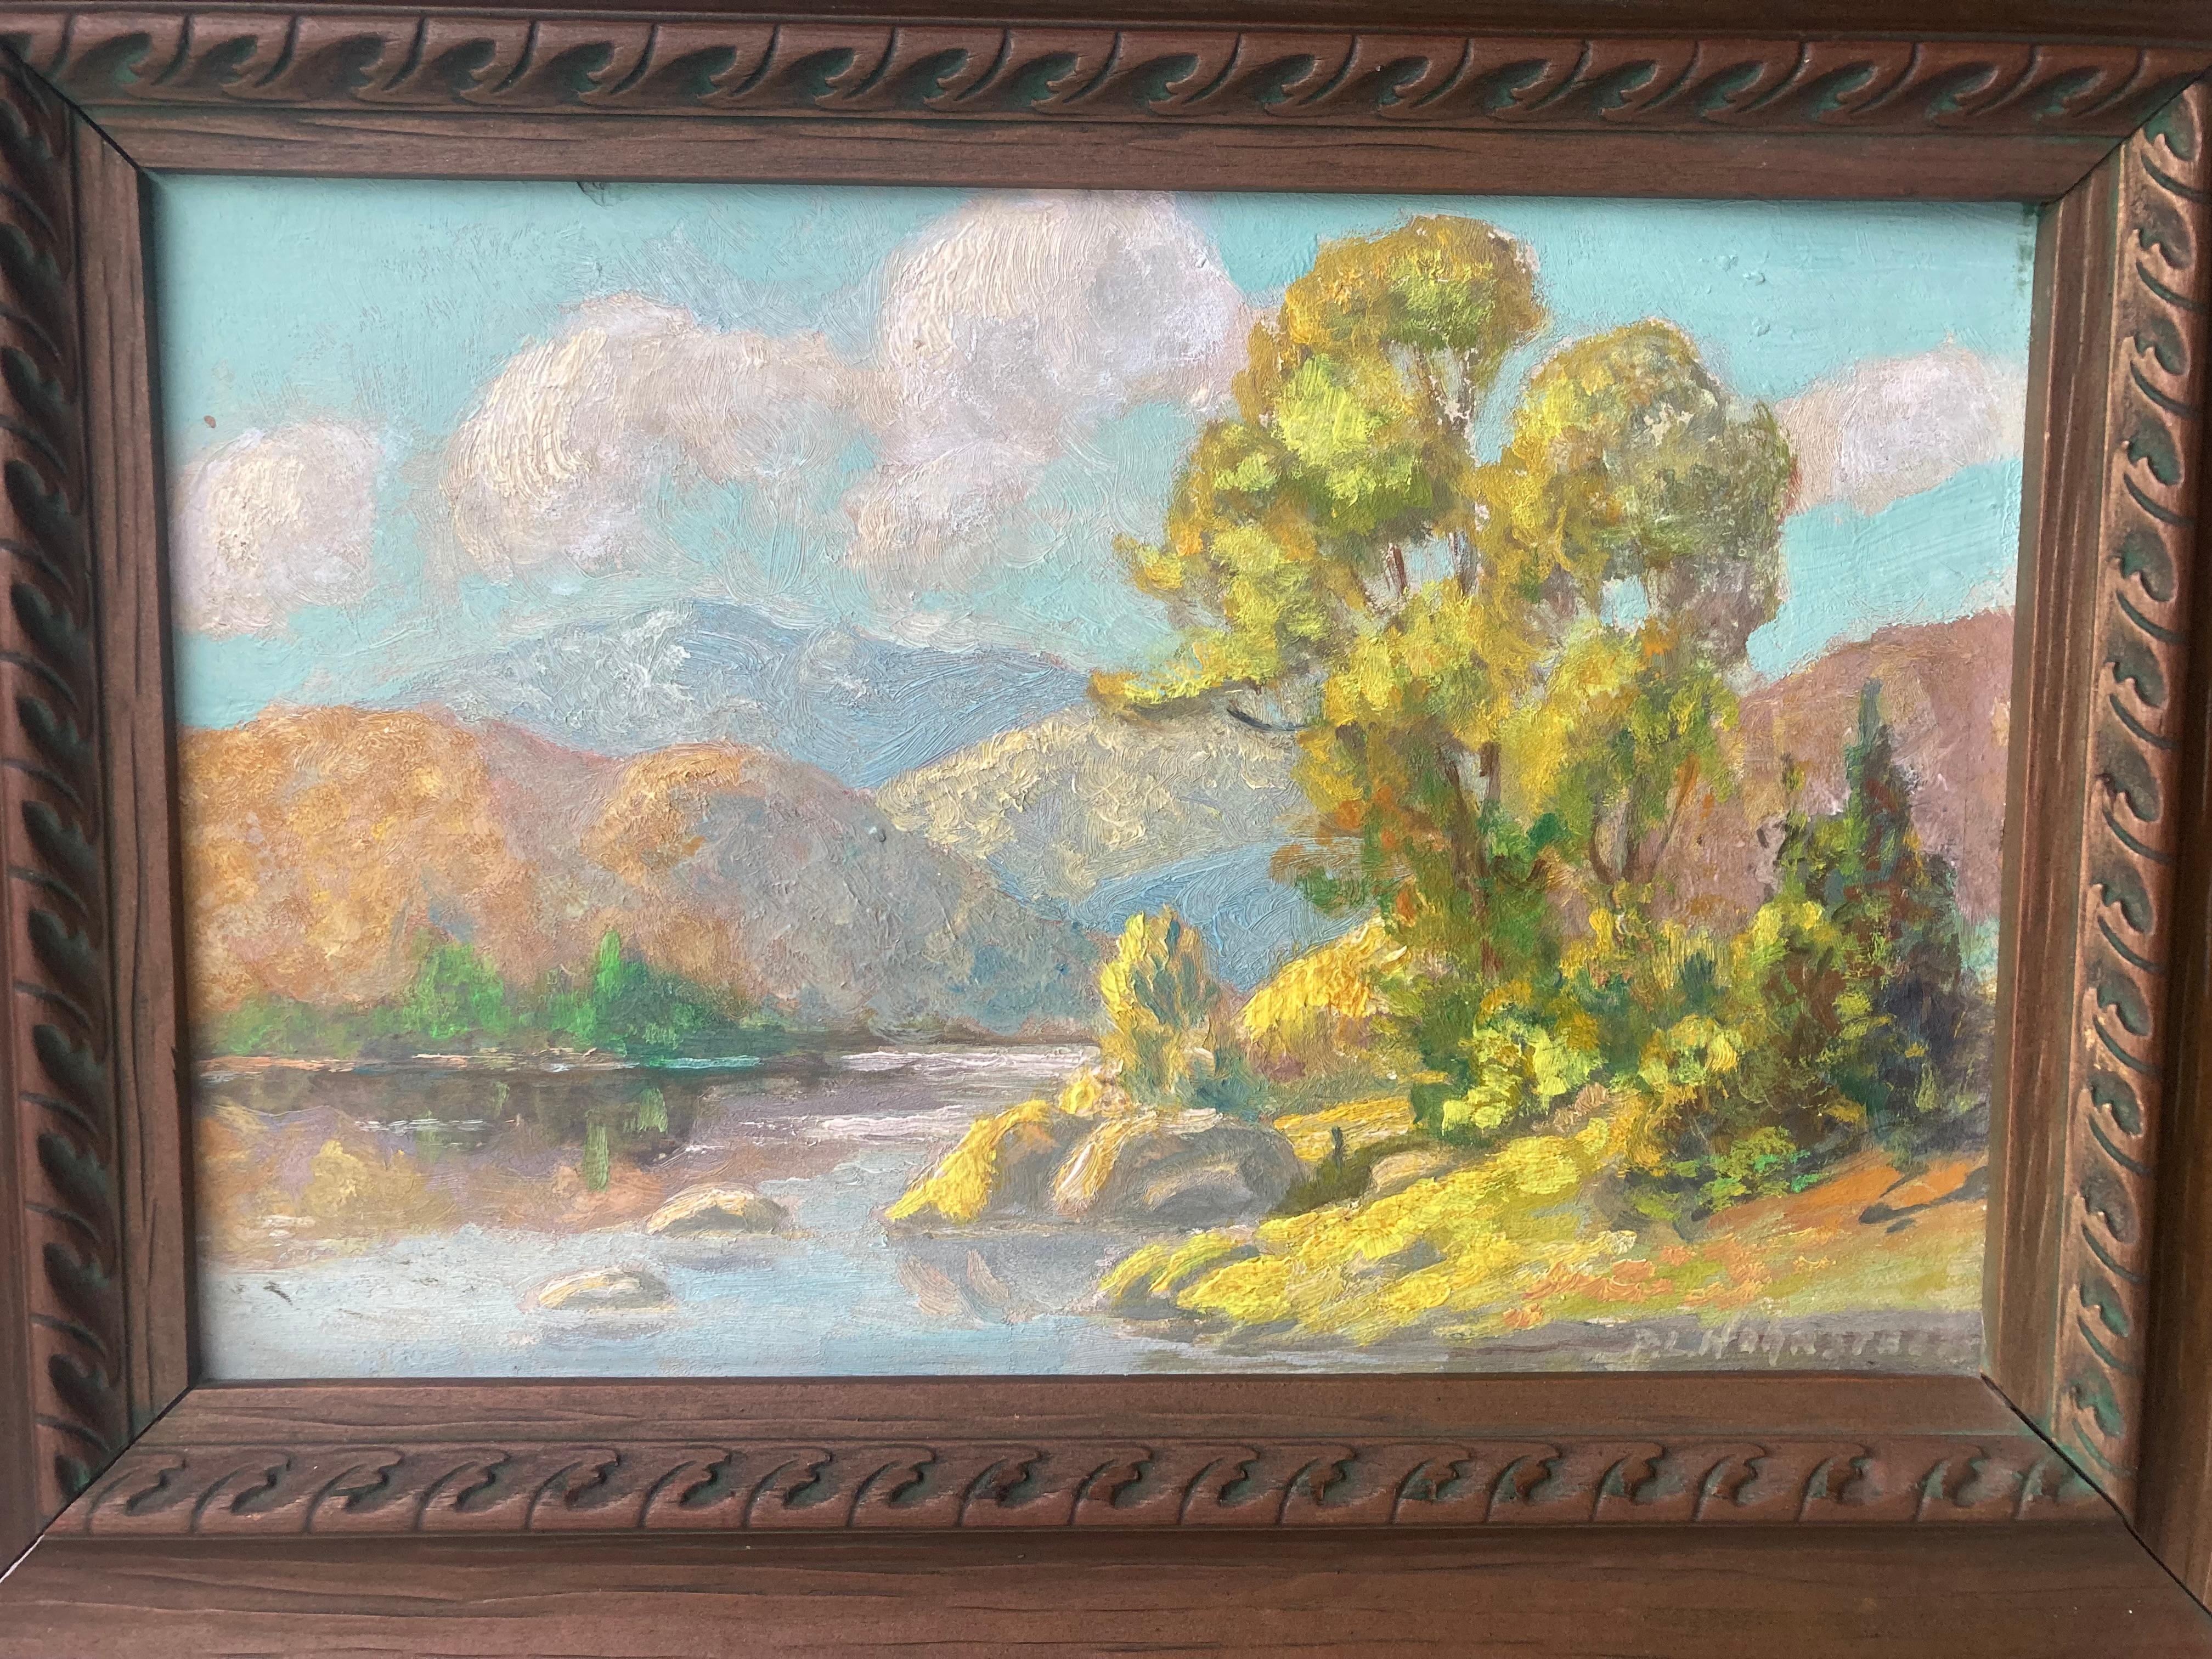 This is a lovely oil painting on board by the well known artist Peter Lanz Hohnstedt .We opened the back and shows 